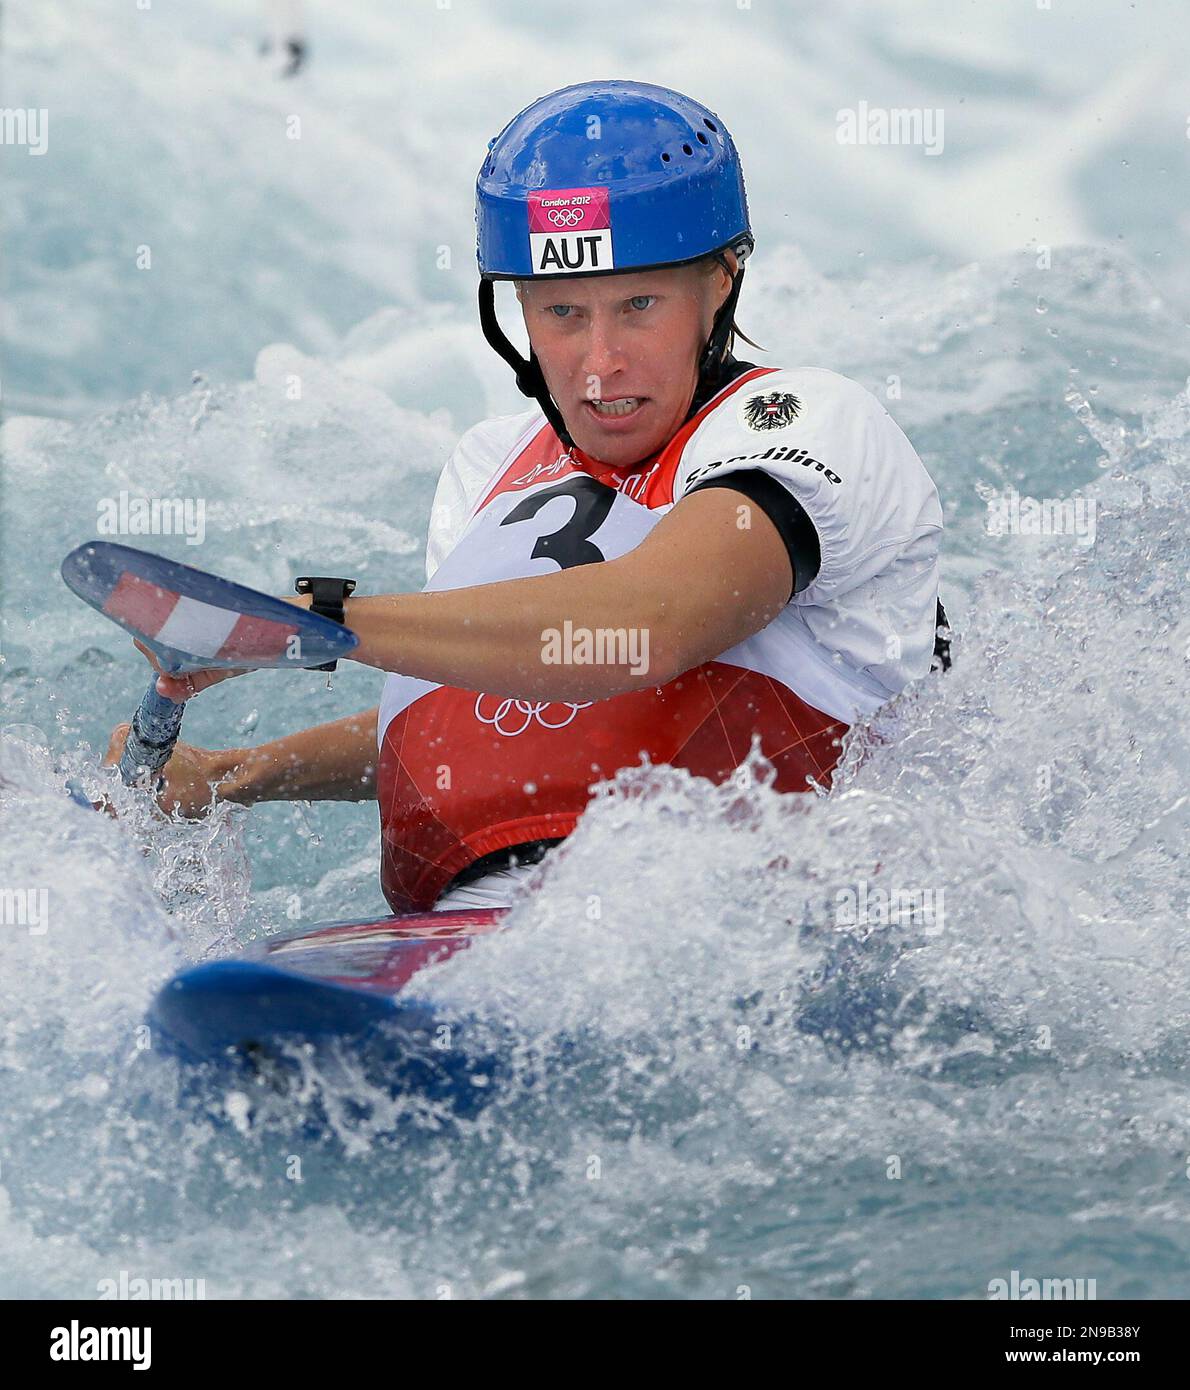 Austrias Corinna Kuhnle competes in the semifinal of the K-1 womens kayak slalom at Lee Valley Whitewater Center, at the 2012 Summer Olympics, Thursday, Aug